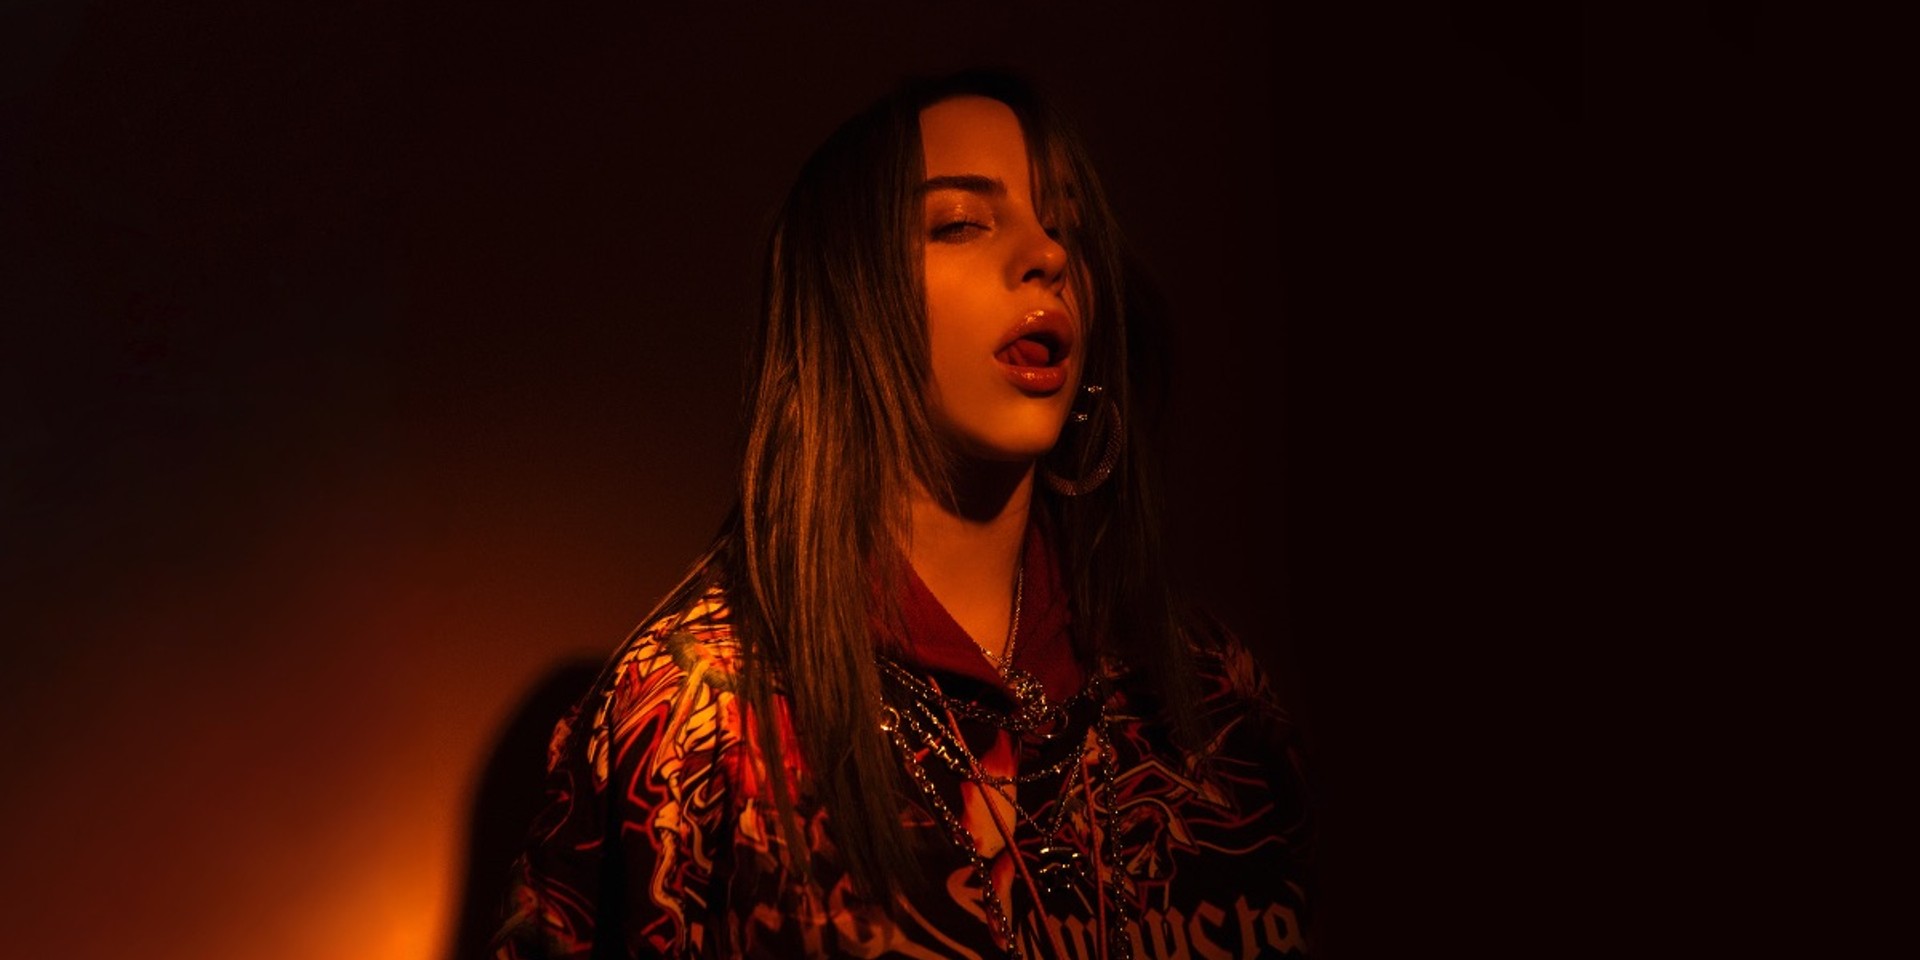 “I thought everyone would hate ‘Bad Guy’”: Billie Eilish shares her thoughts on perceived reception of some of her biggest songs